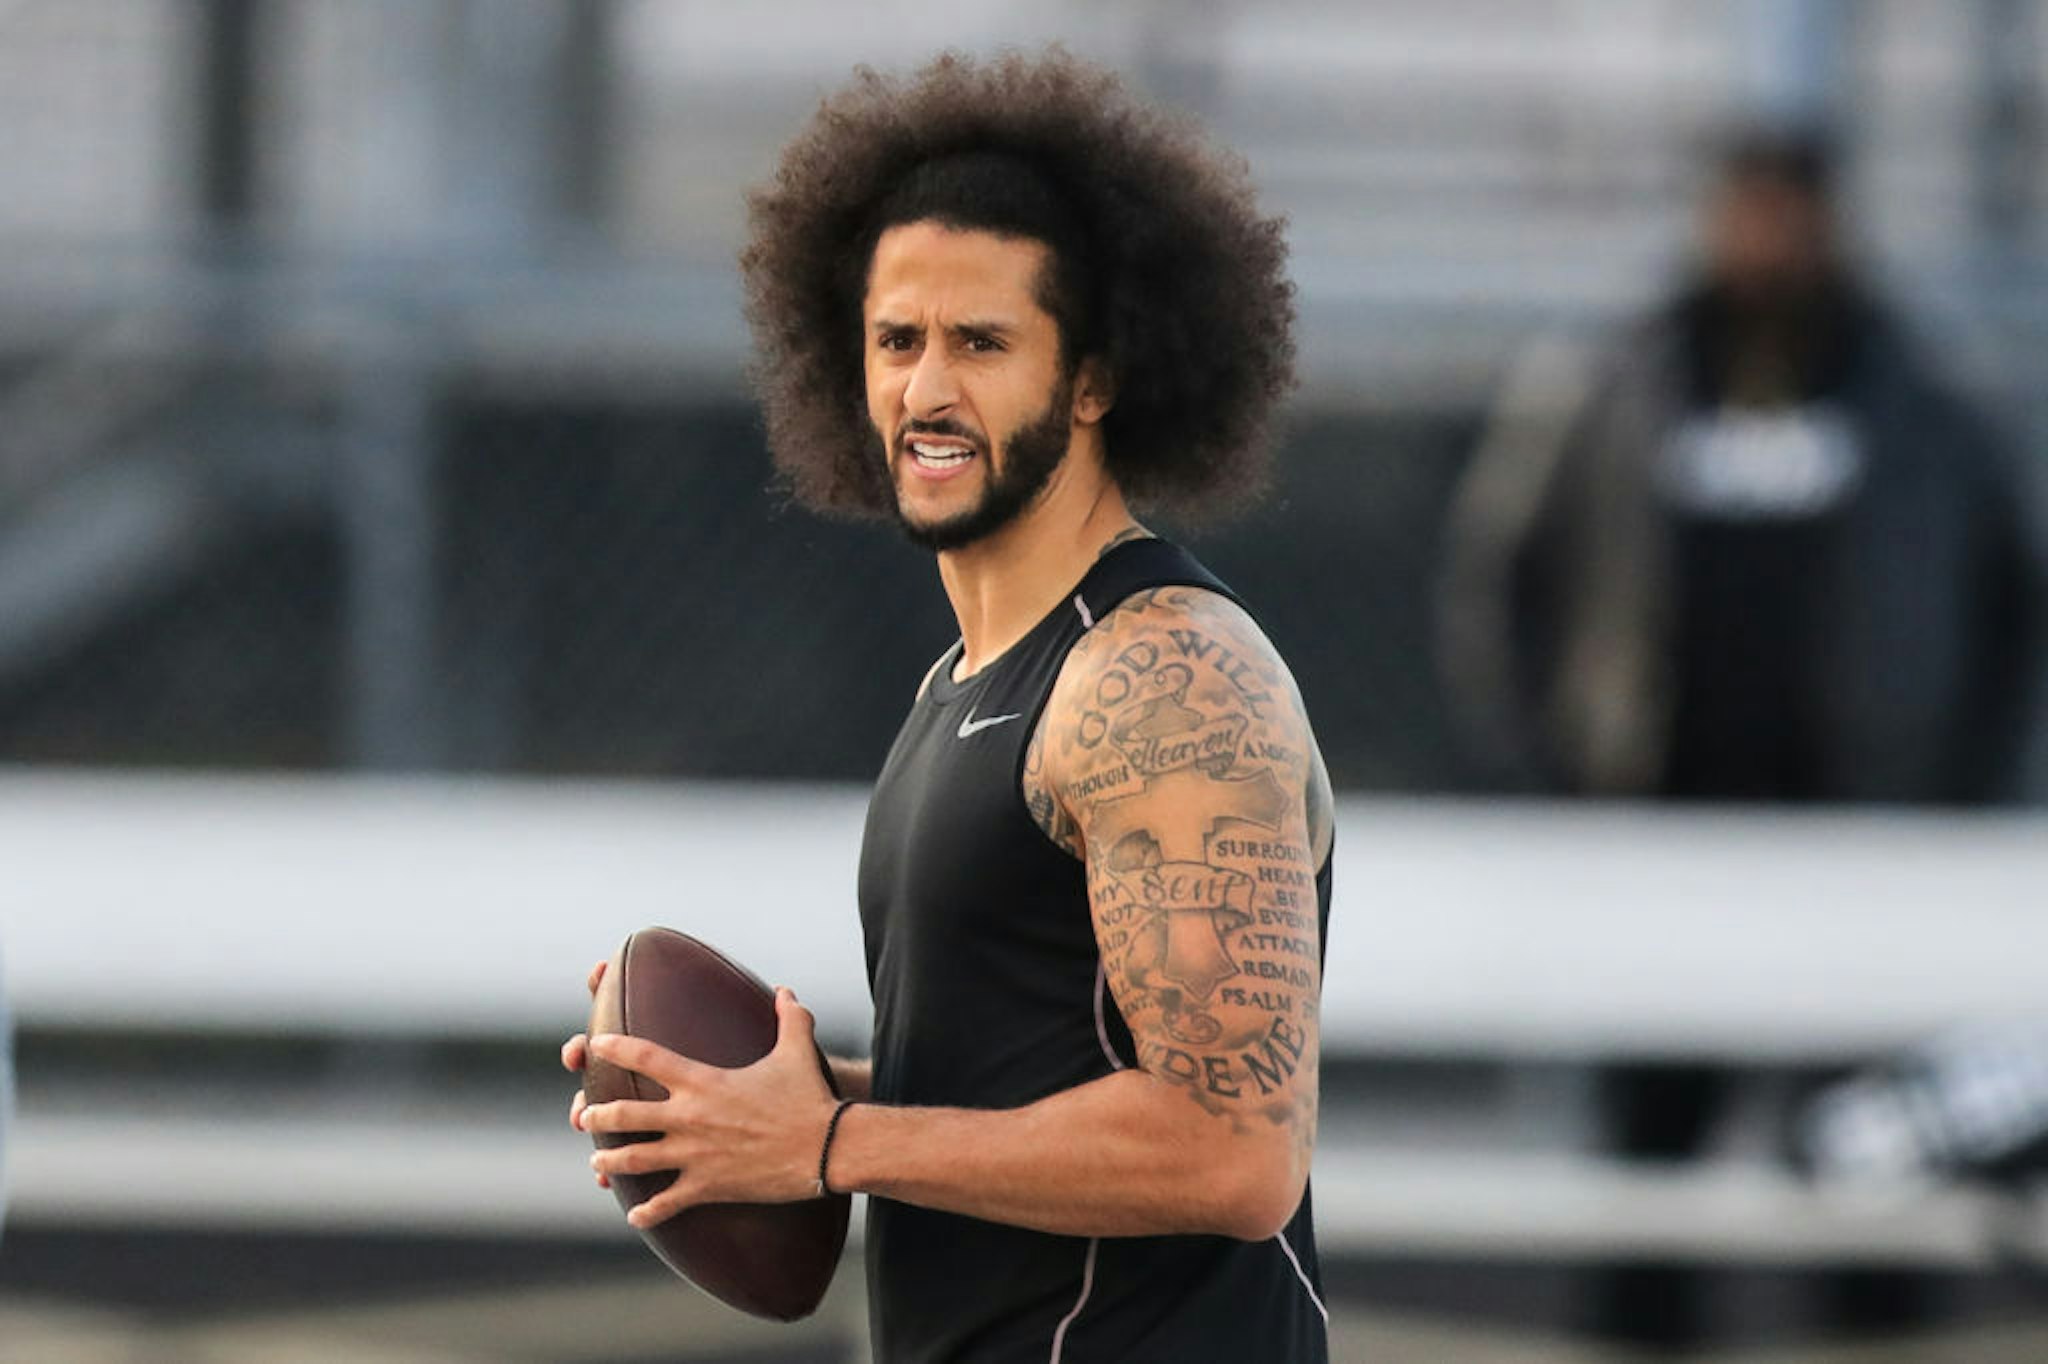 Colin Kaepernick looks to make a pass during a private NFL workout held at Charles R Drew high school on November 16, 2019 in Riverdale, Georgia.